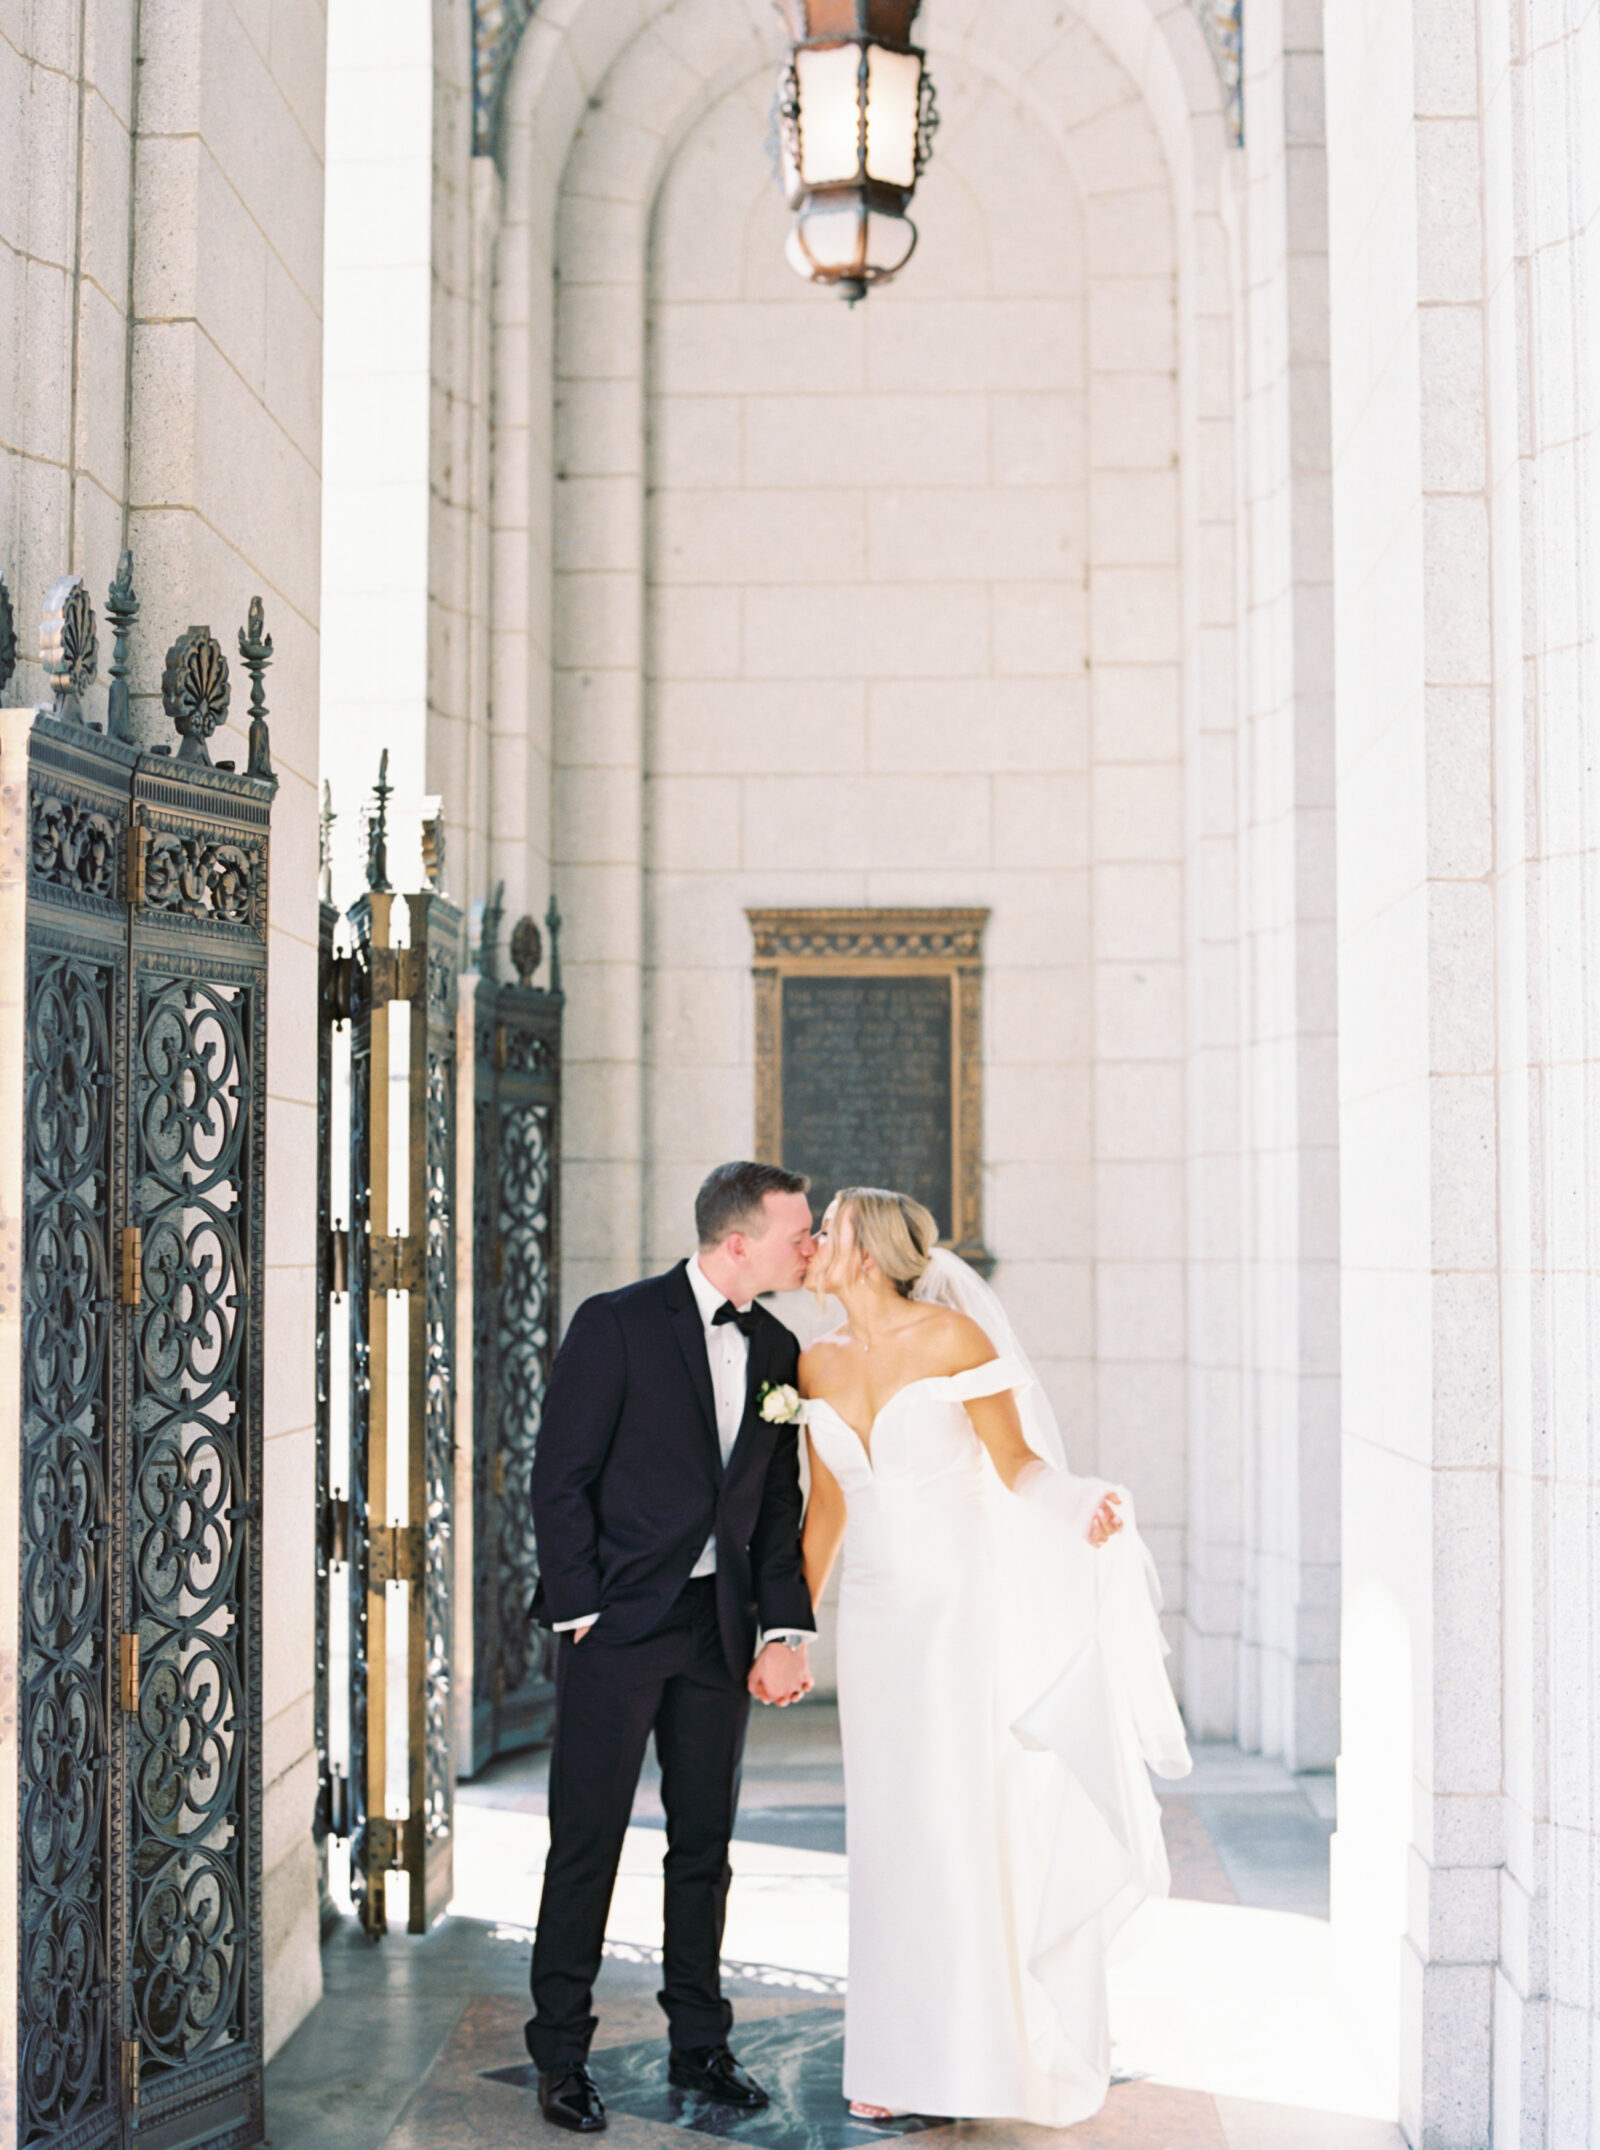 St Louis Central Library Wedding Day photos